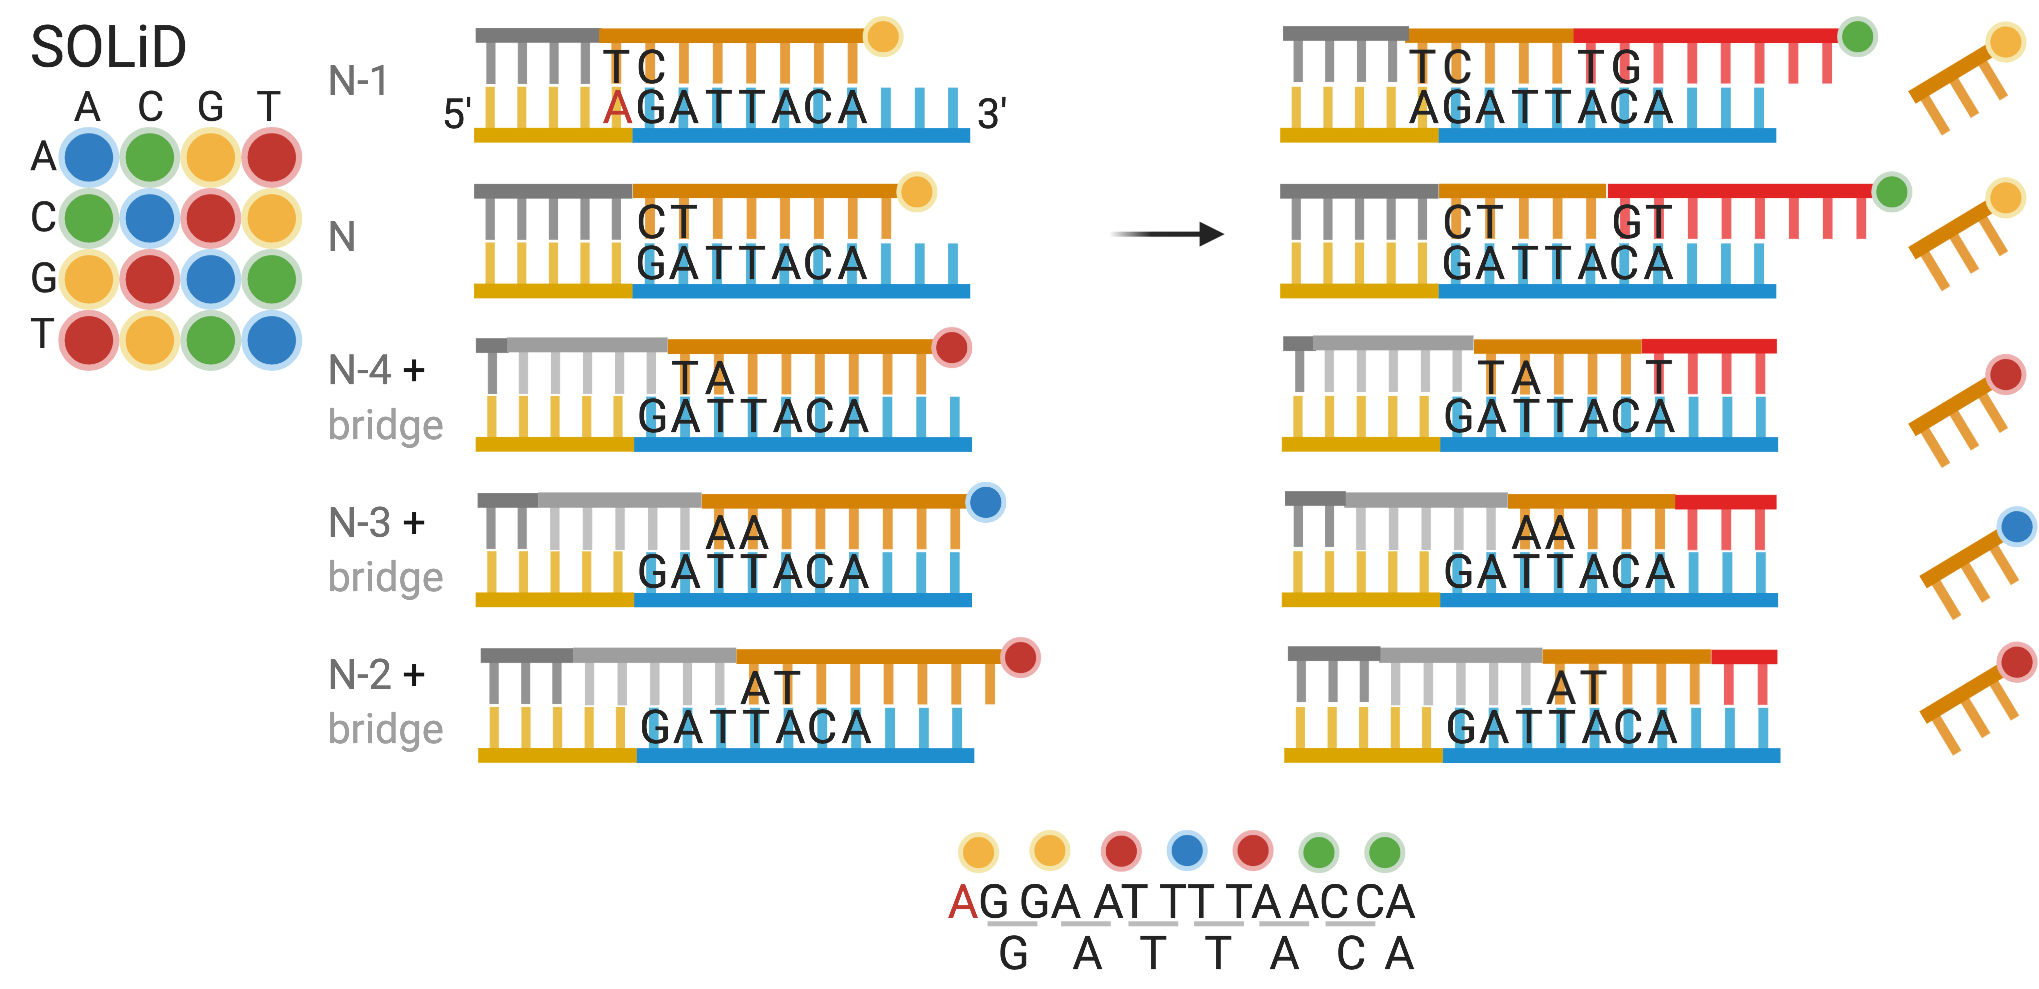 Schematic of SOLiD sequencing, determining the sequence GATTACA. The rows are arranged in the order of 5' to 3' positions of the first fluorescent probe, but the actual hybridization and ligation can take a different order. As part of the constant region, the 'A' highlighted in red is known.